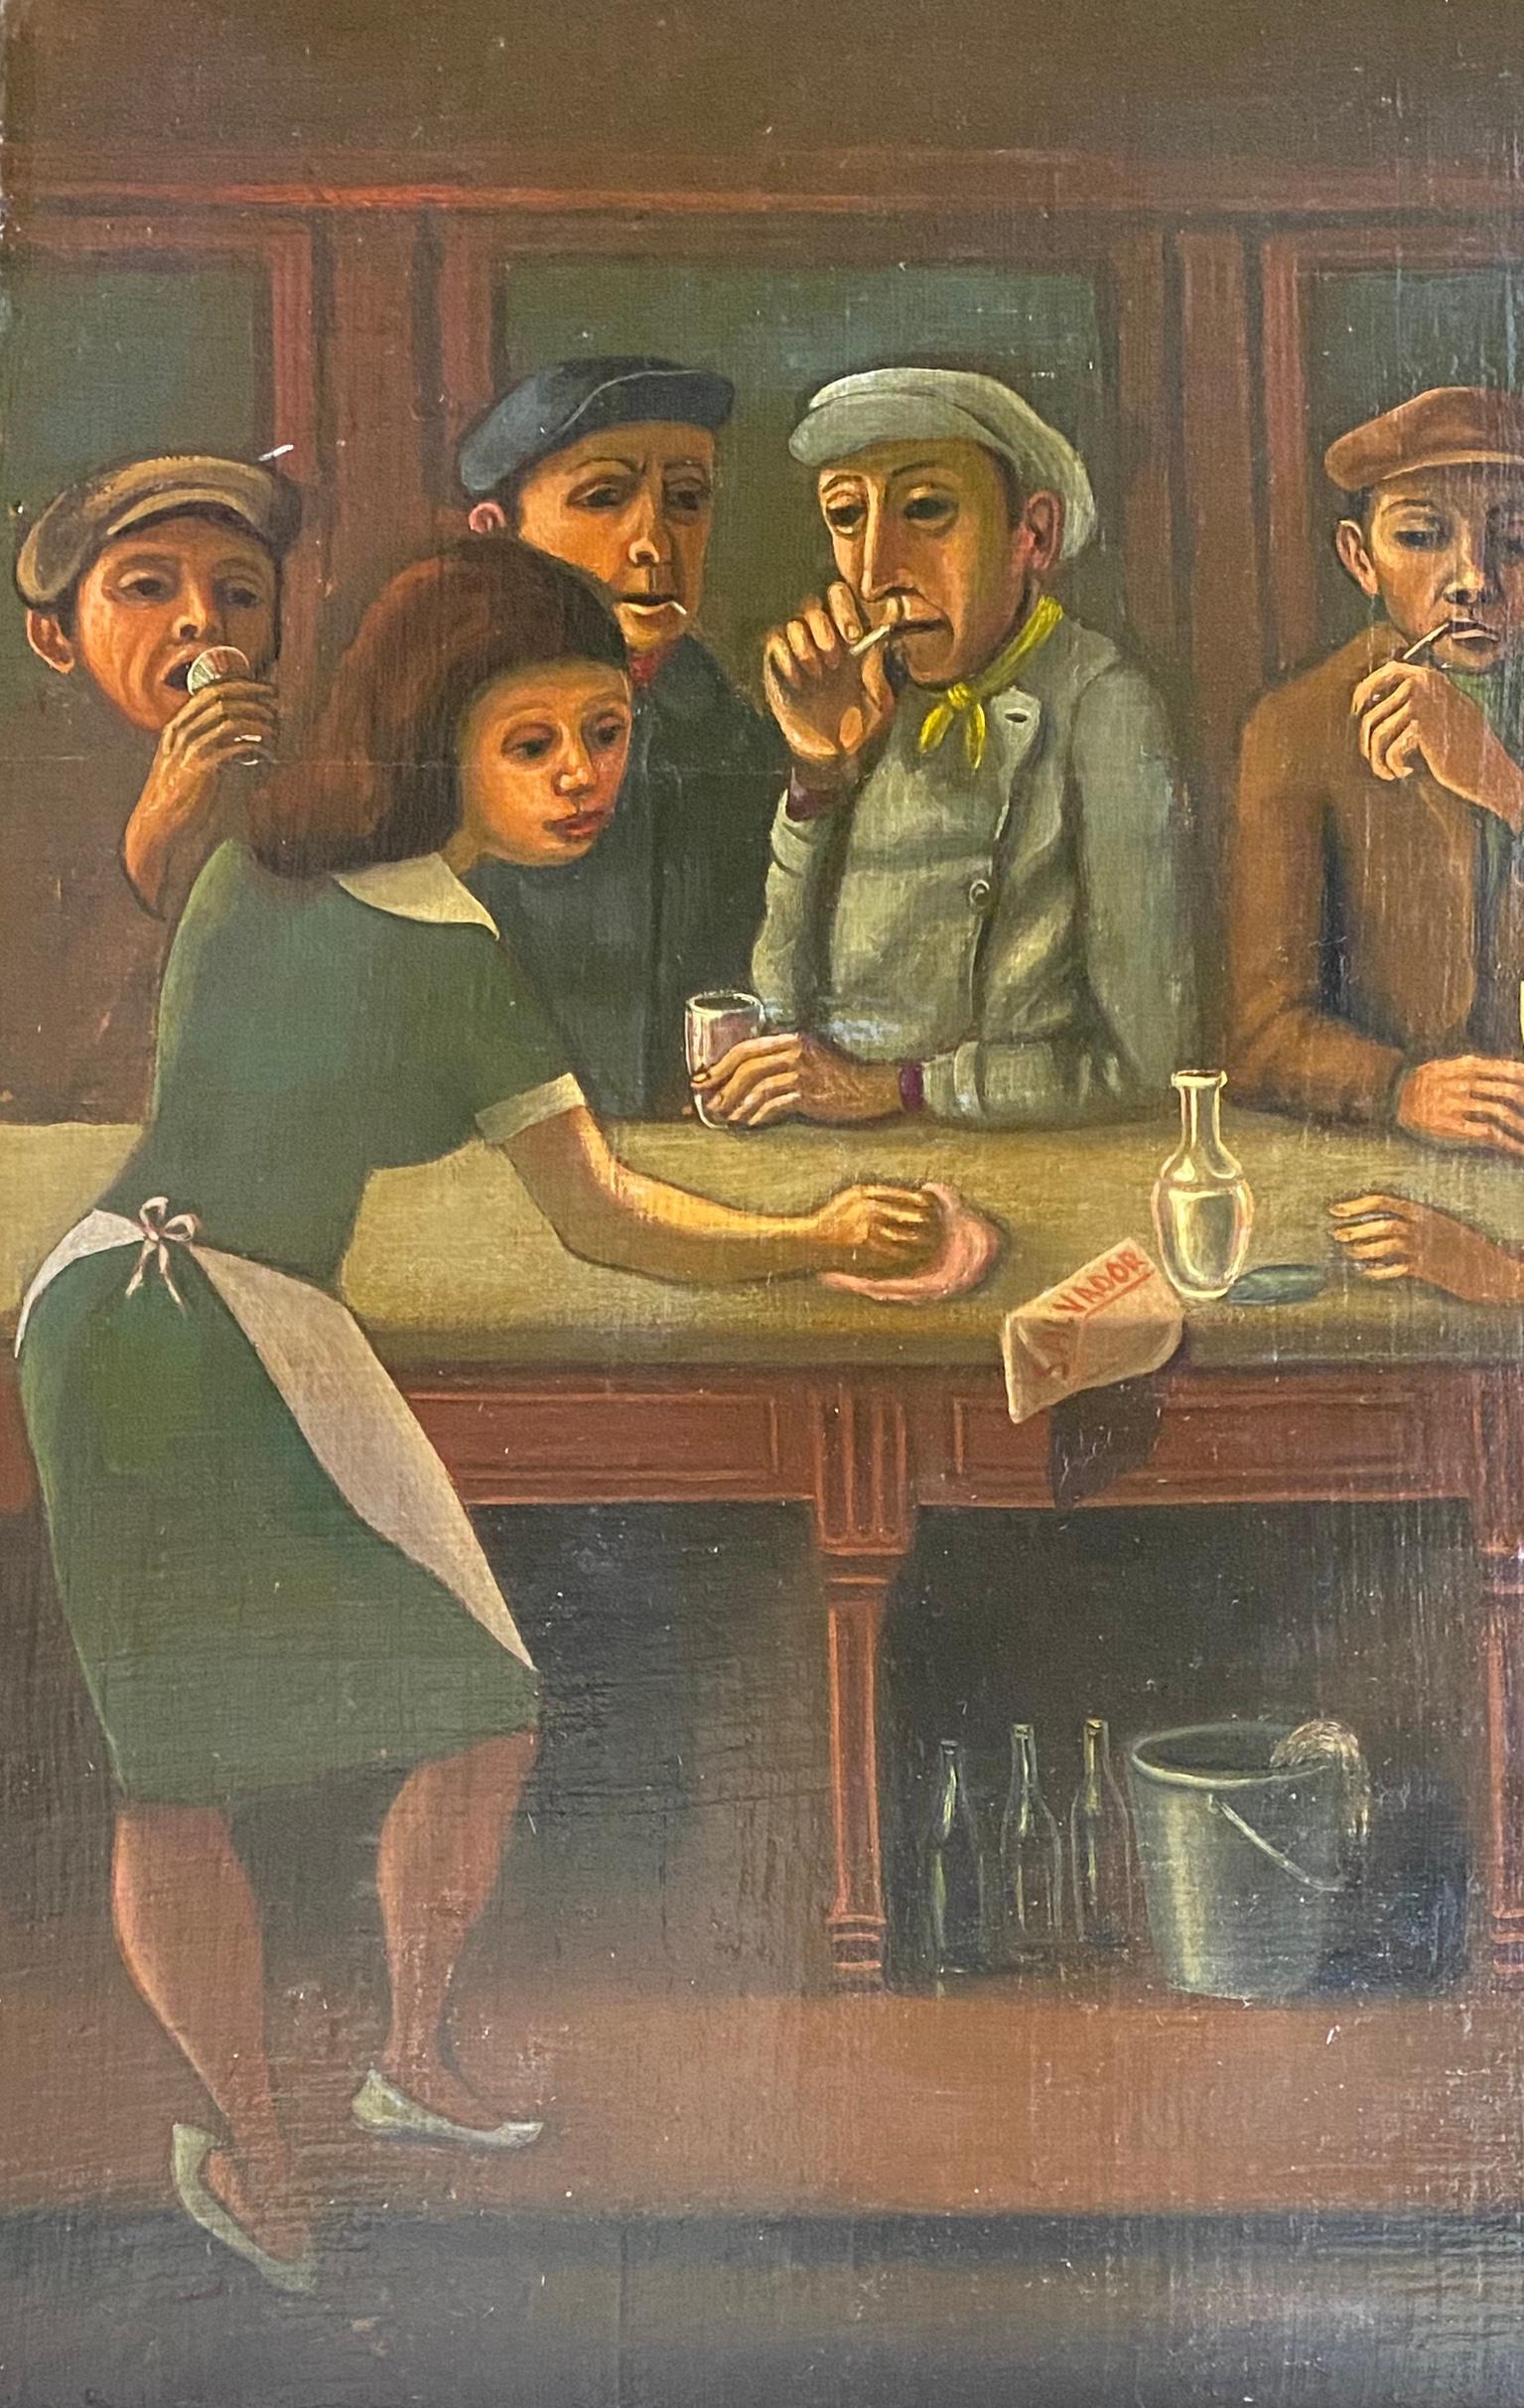 The bar: prohibition speakeasy era faux naif surrealist outsider painting - Outsider Art Painting by Carlos Palet Salvador